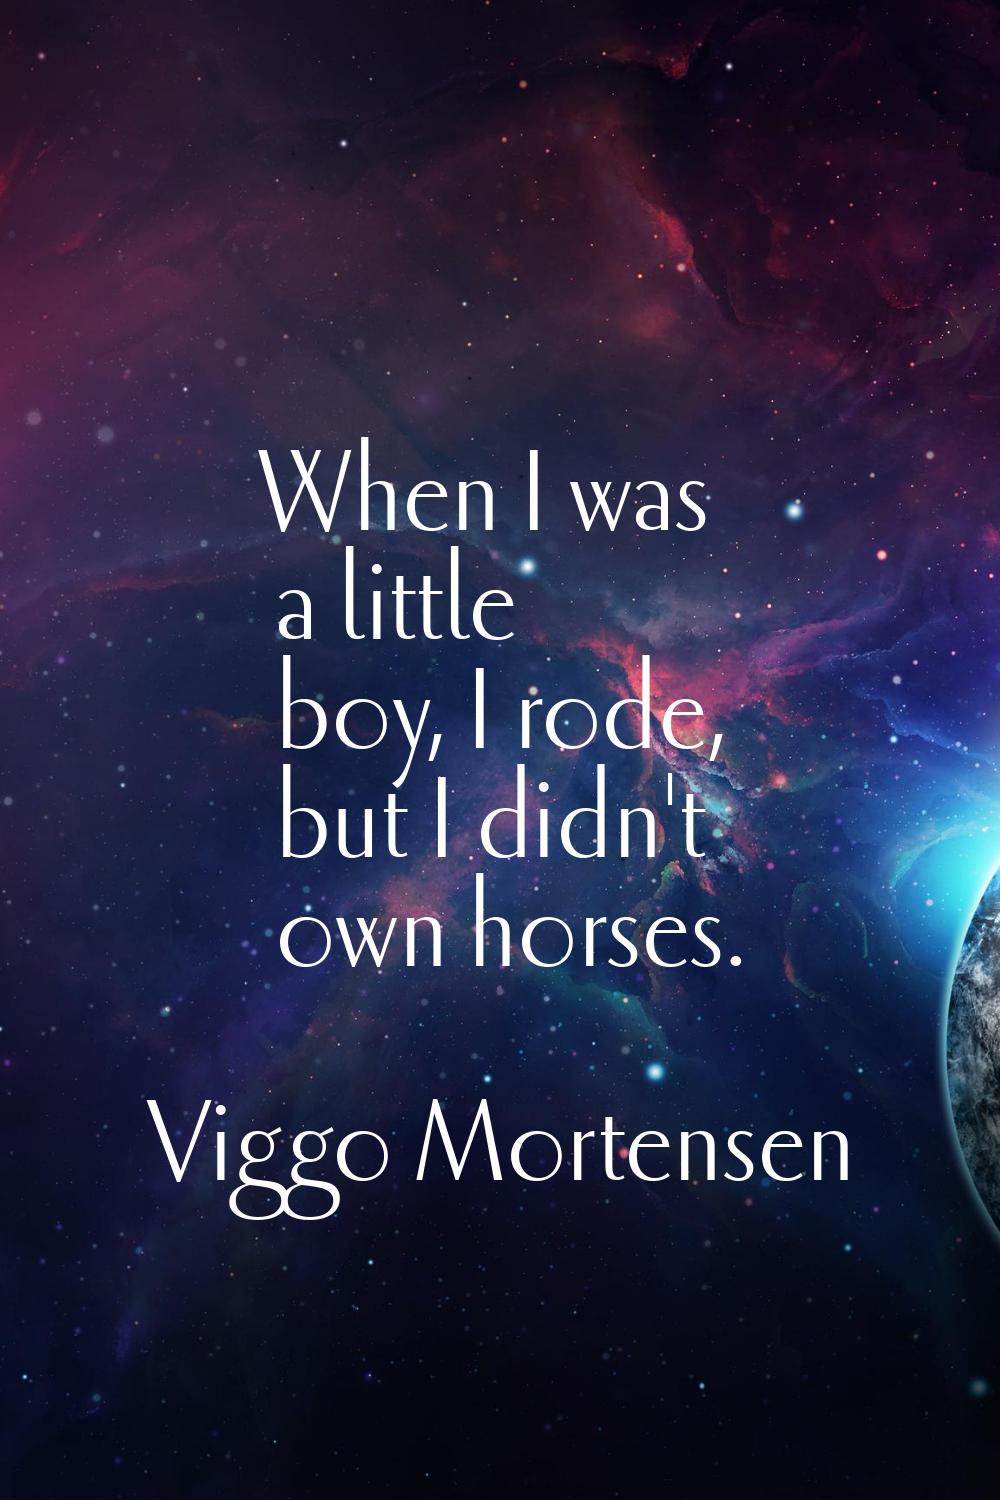 When I was a little boy, I rode, but I didn't own horses.